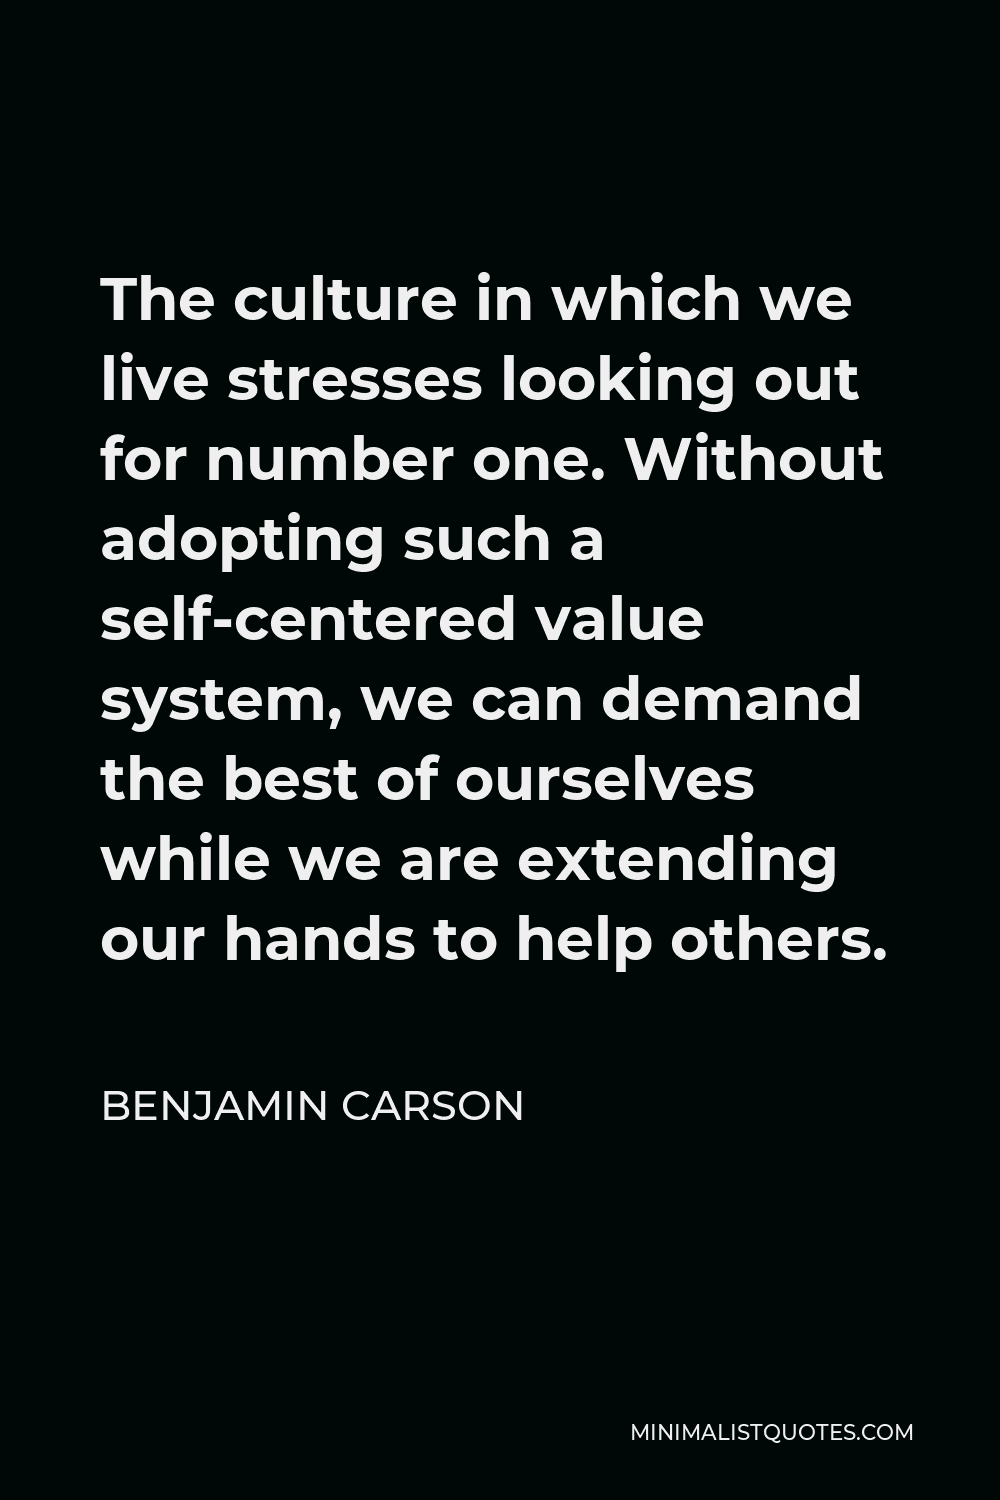 Benjamin Carson Quote - The culture in which we live stresses looking out for number one. Without adopting such a self-centered value system, we can demand the best of ourselves while we are extending our hands to help others.